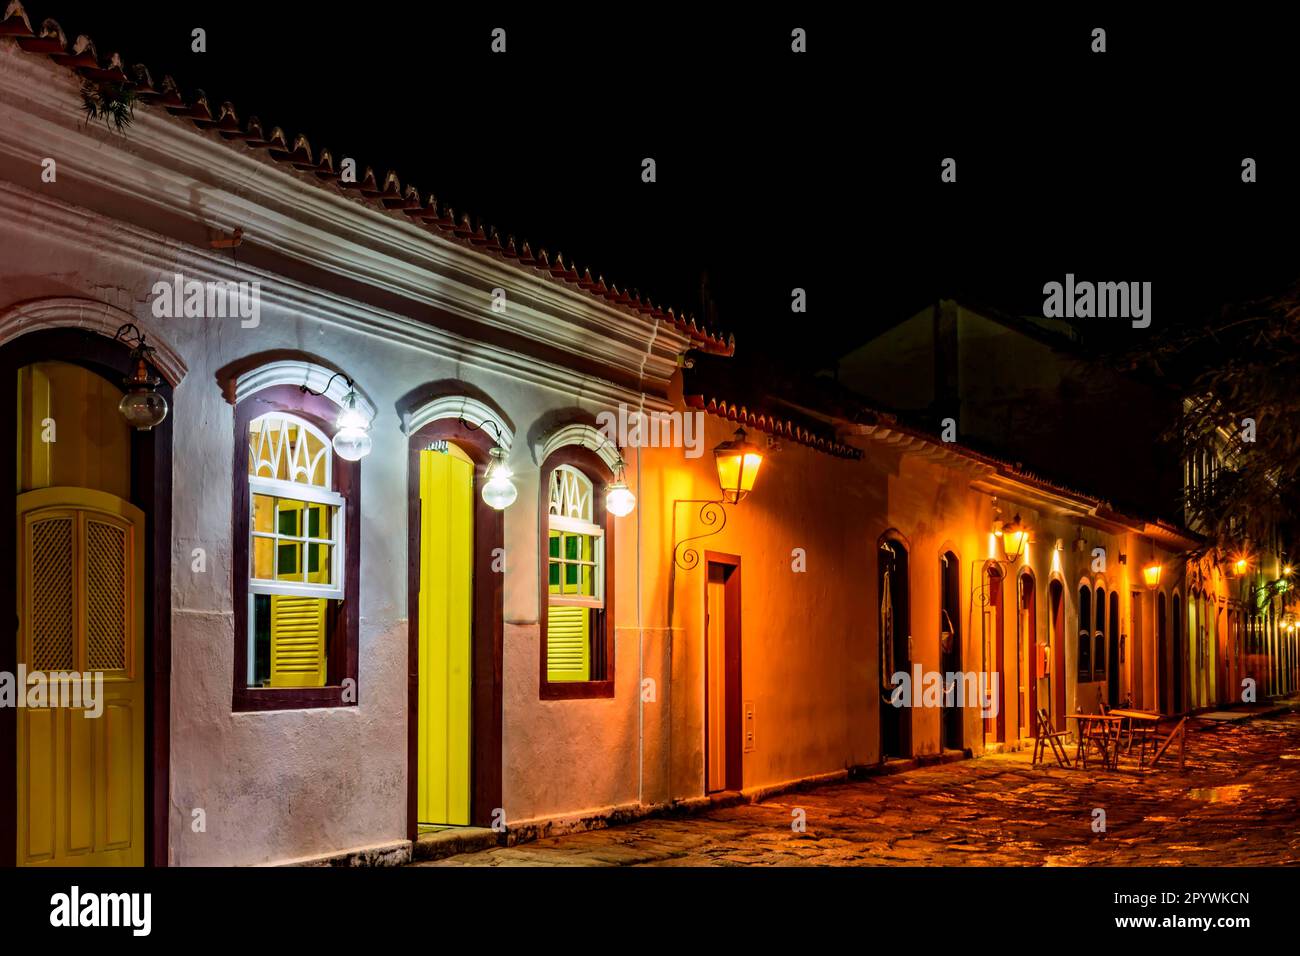 Stone street and colonial style houses illuminate at night in the city of Paraty on the coast of Rio de Janeiro, Brazil, Brasil Stock Photo